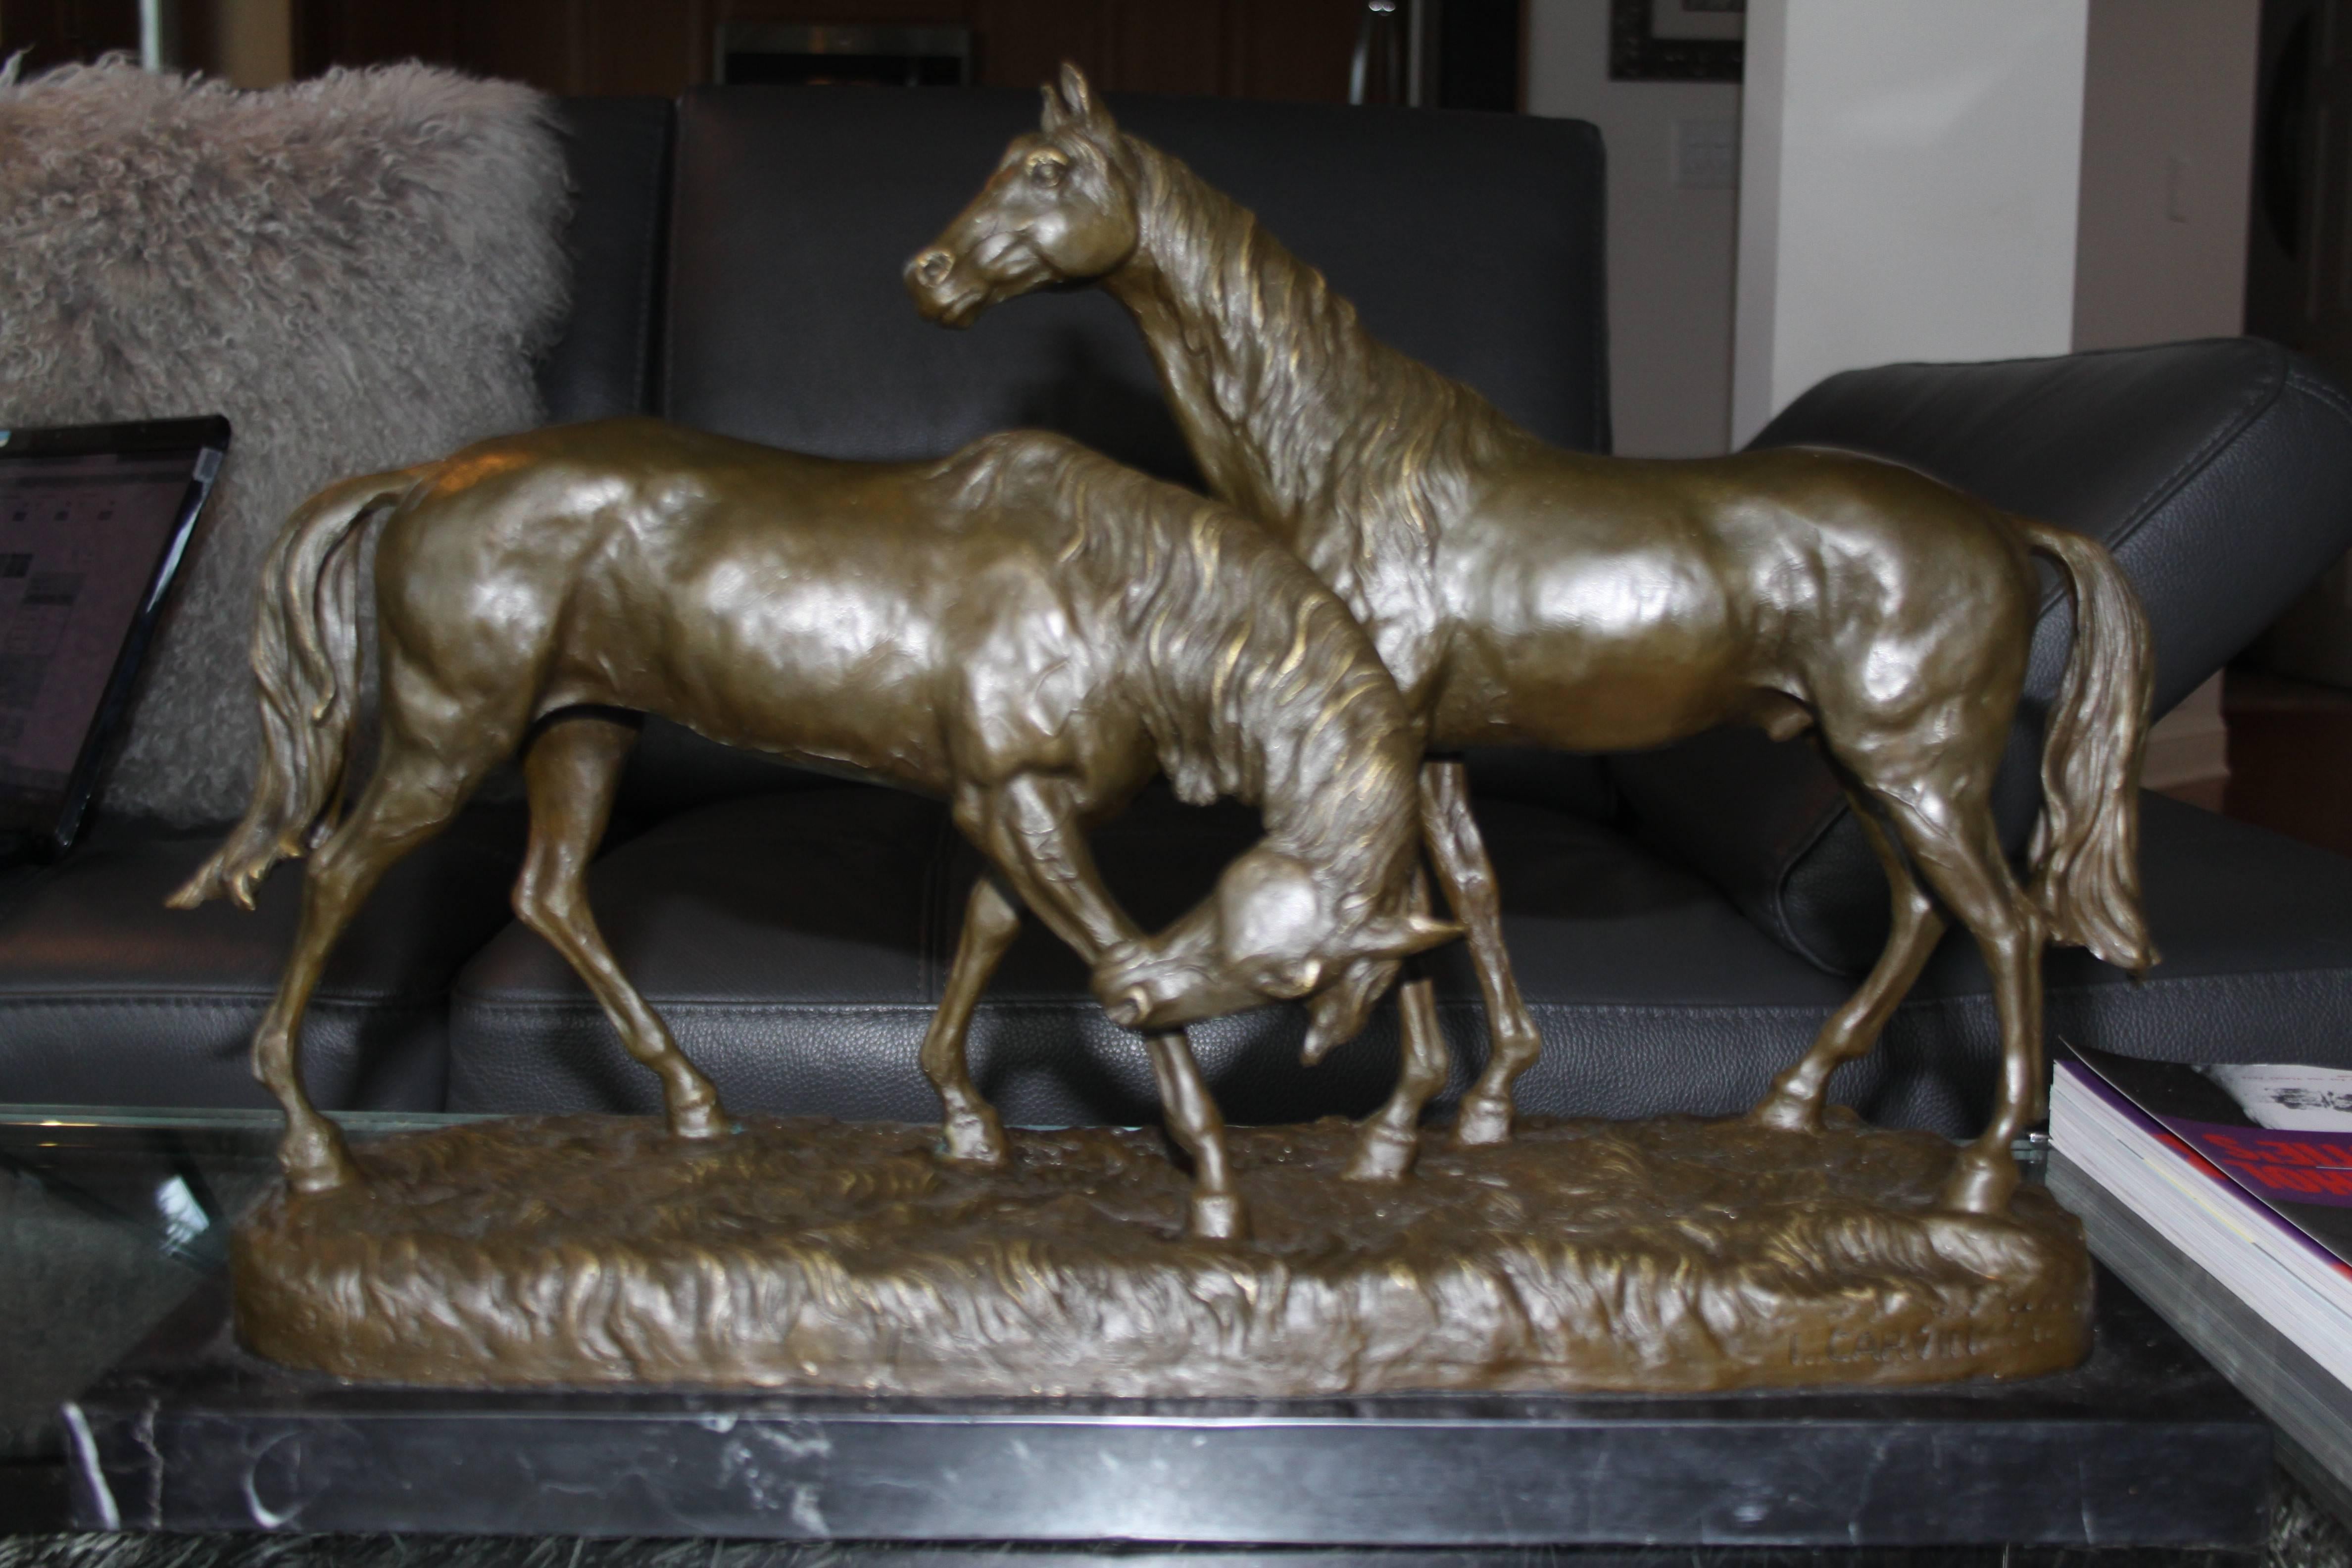 Stunning pair of French bronze horses signed Carvin
Pair of horses are gorgeous in brown patina on black marble base
Great collectors piece and this was purchased from Les Puces antiques market in Paris.
Louis Albert Carvin (1875 - 1951)was